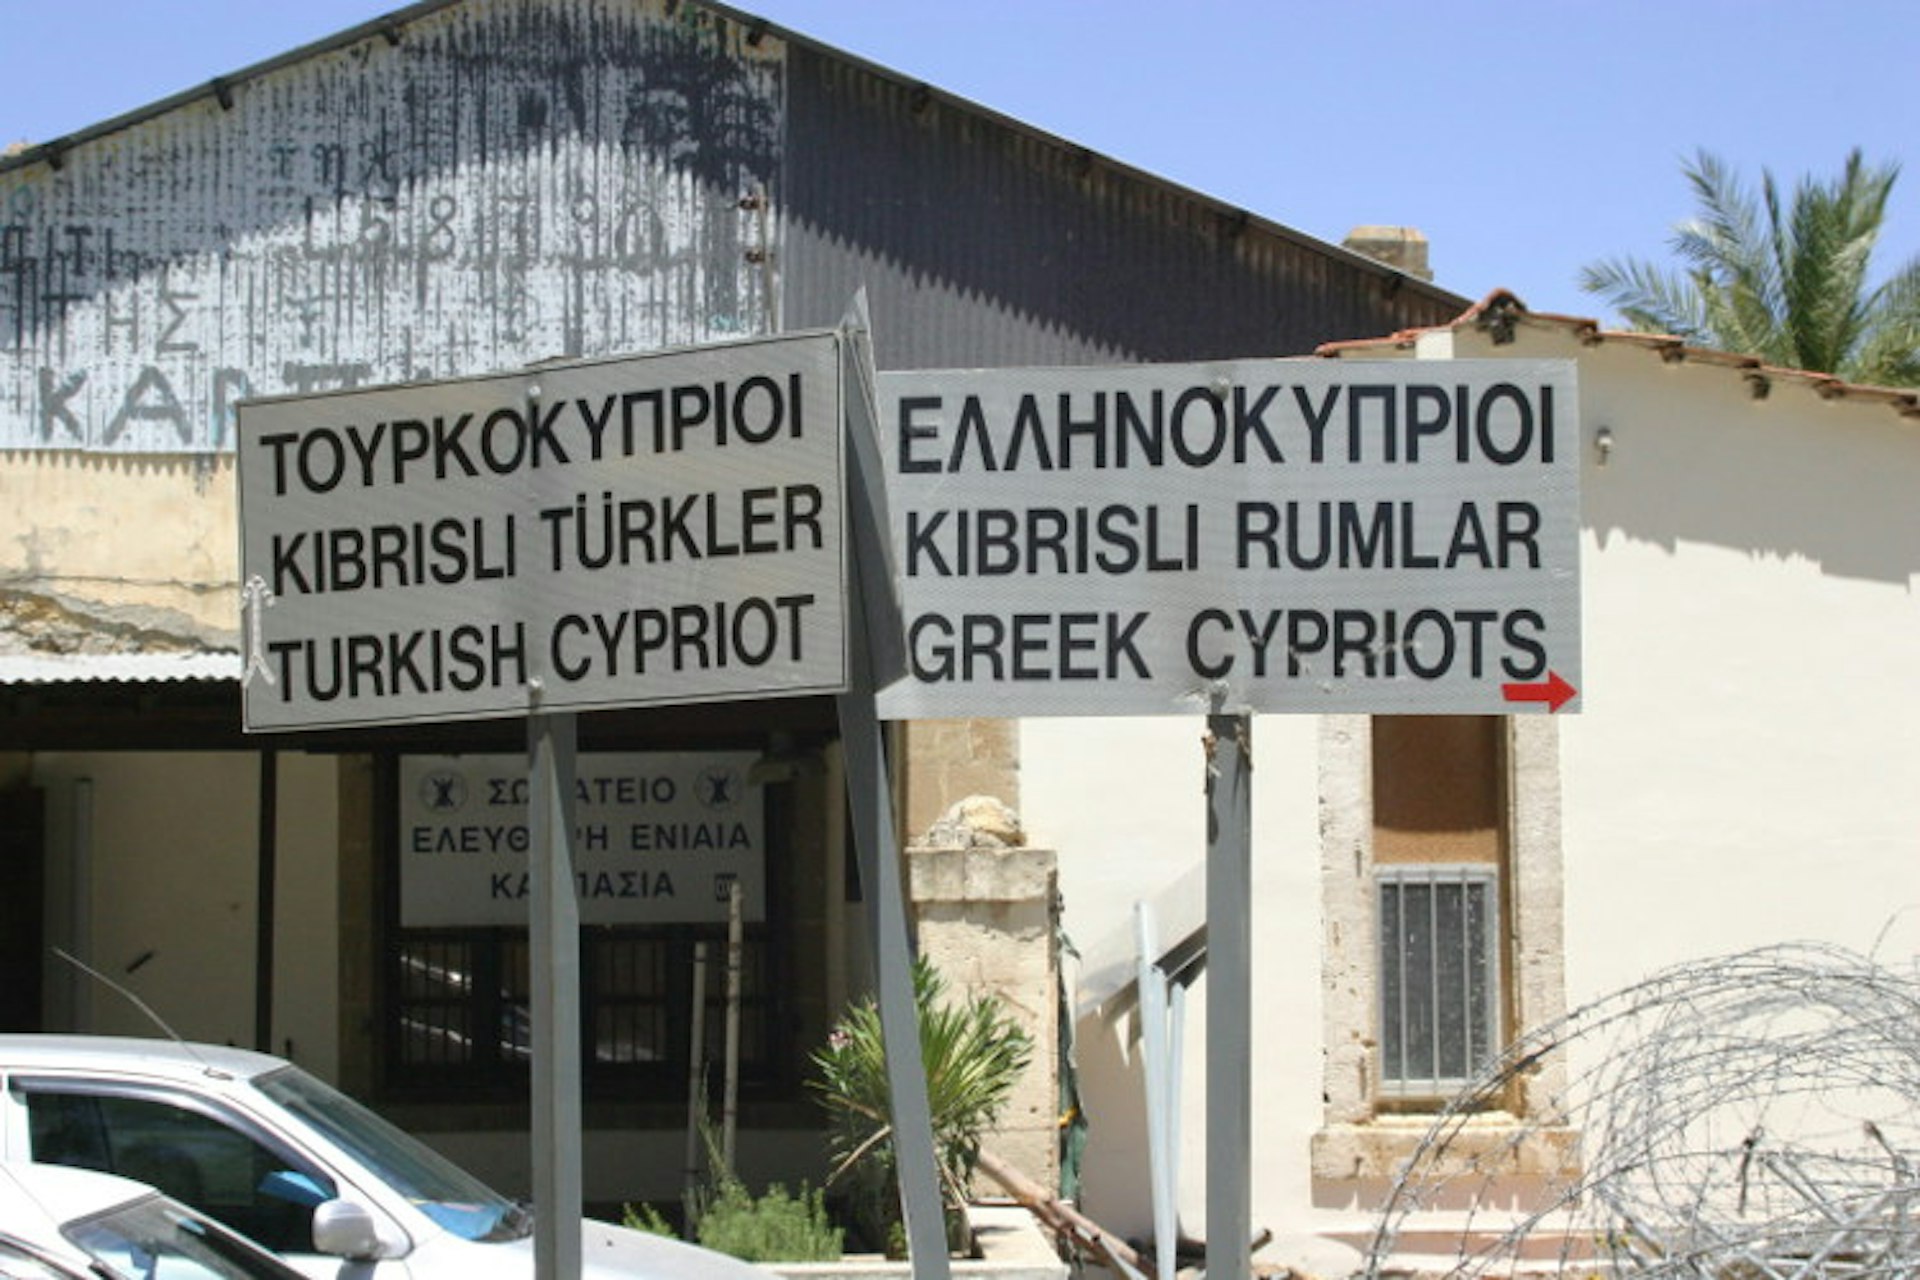 Signs in Greek, Turkish and English near Ledra Palace checkpoint, Nicosia. Image by Christopher S Rose / Getty Images